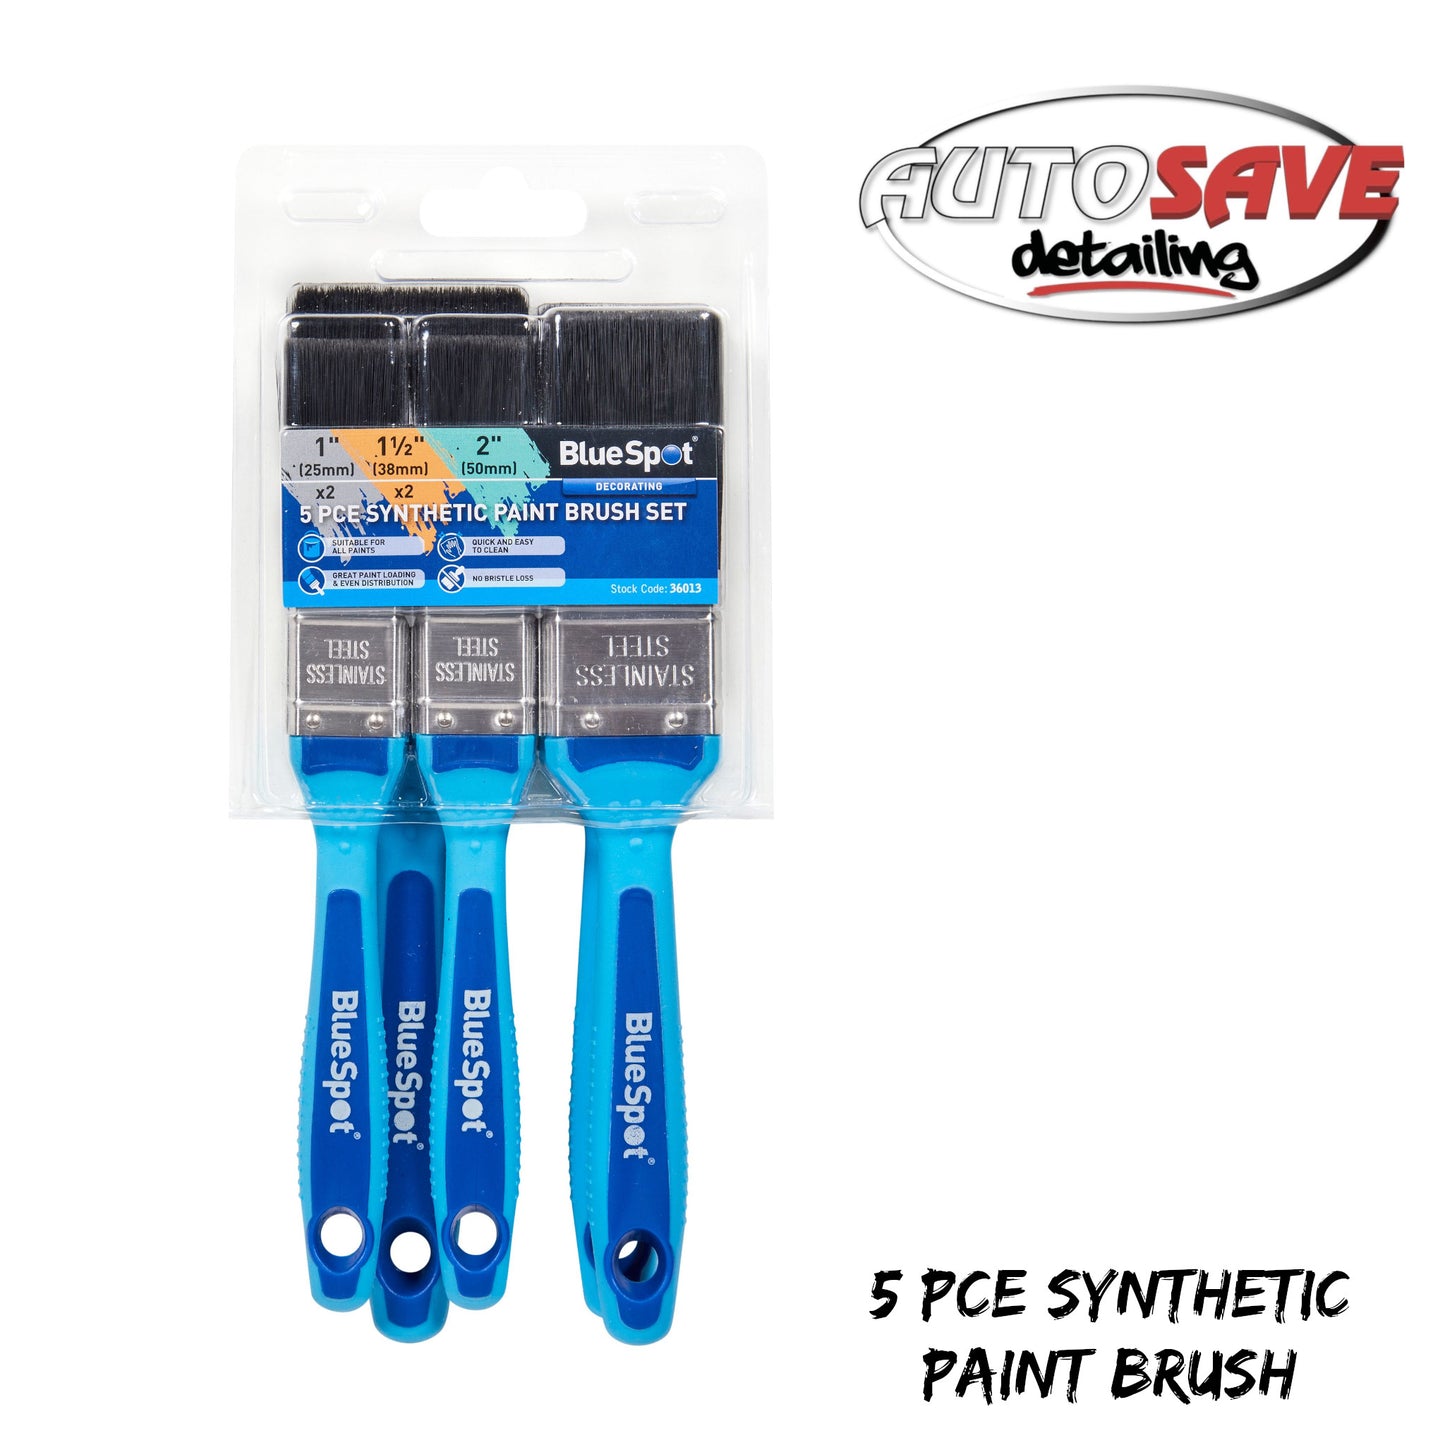 5 PCE SYNTHETIC PAINT BRUSH SET WITH SOFT GRIP HANDLE (2 PCE 1", 2 PCE 1 1/2", 1 PCE 2")